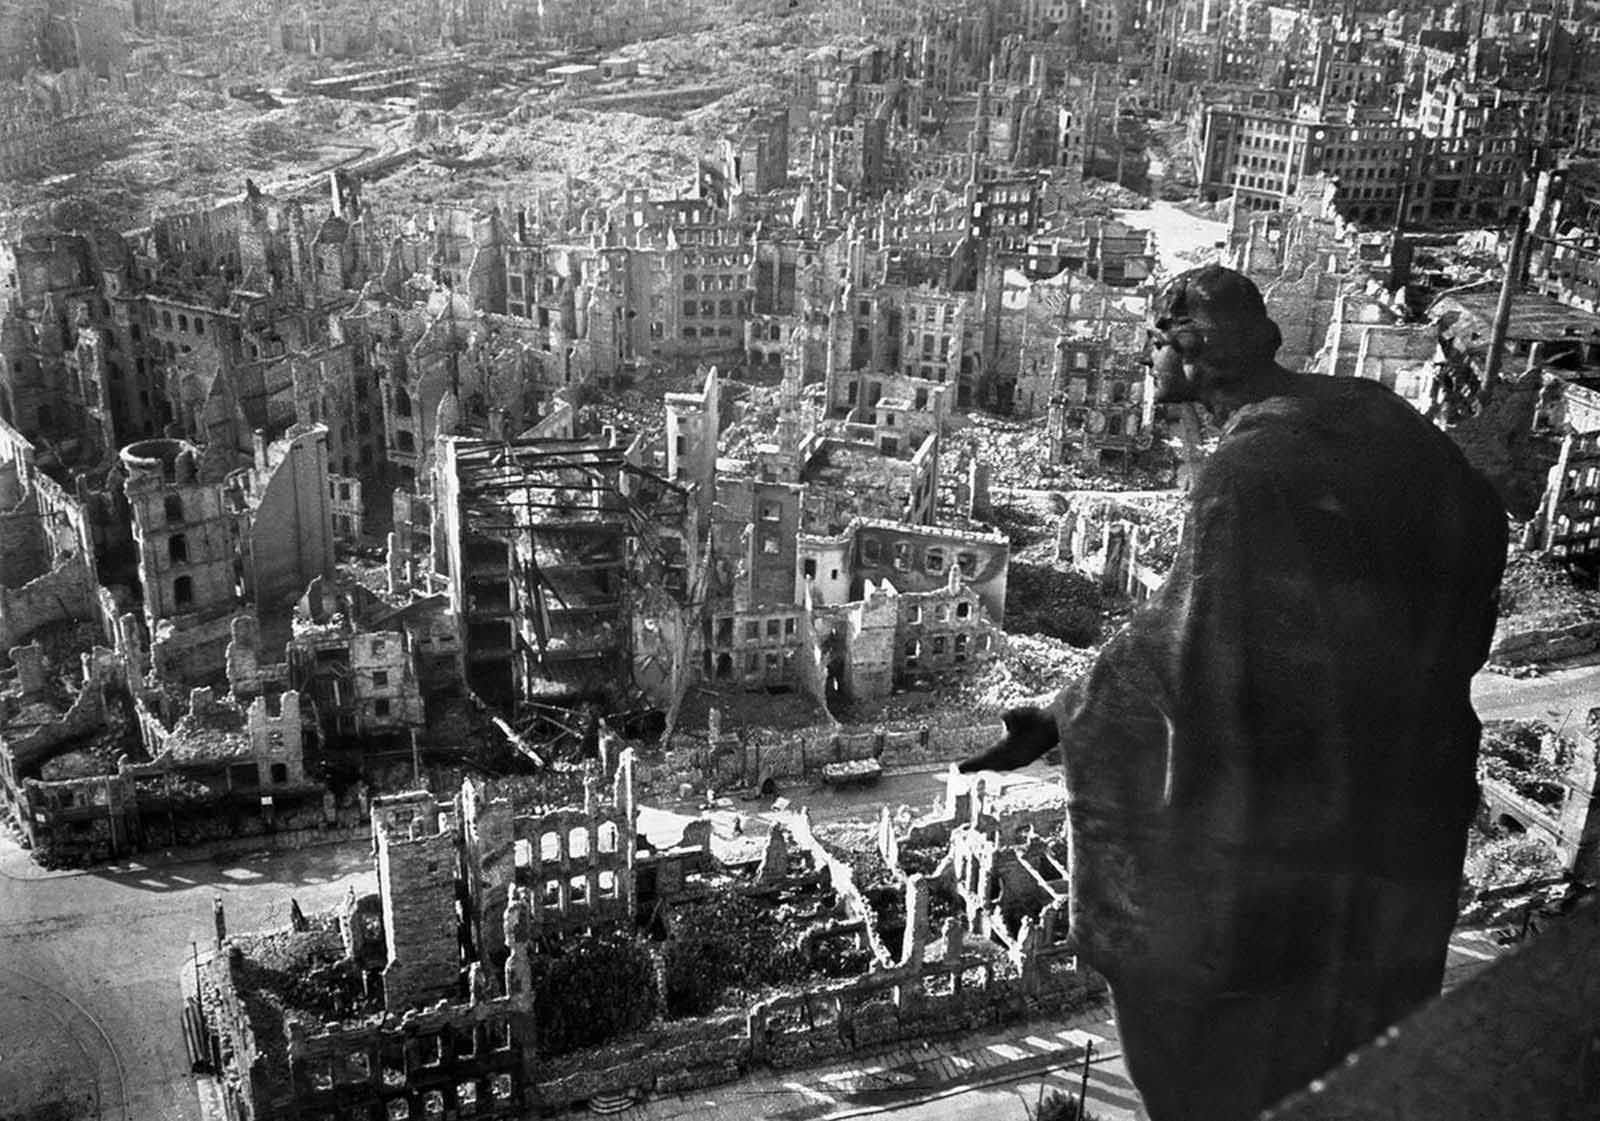 A view taken from Dresden’s town hall of the destroyed Old Town after the allied bombings between February 13 and 15, 1945. Some 3,600 aircraft dropped more than 3,900 tons of high-explosive bombs and incendiary devices on the German city. The resulting firestorm destroyed 15 square miles of the city center, and killed more than 22,000.